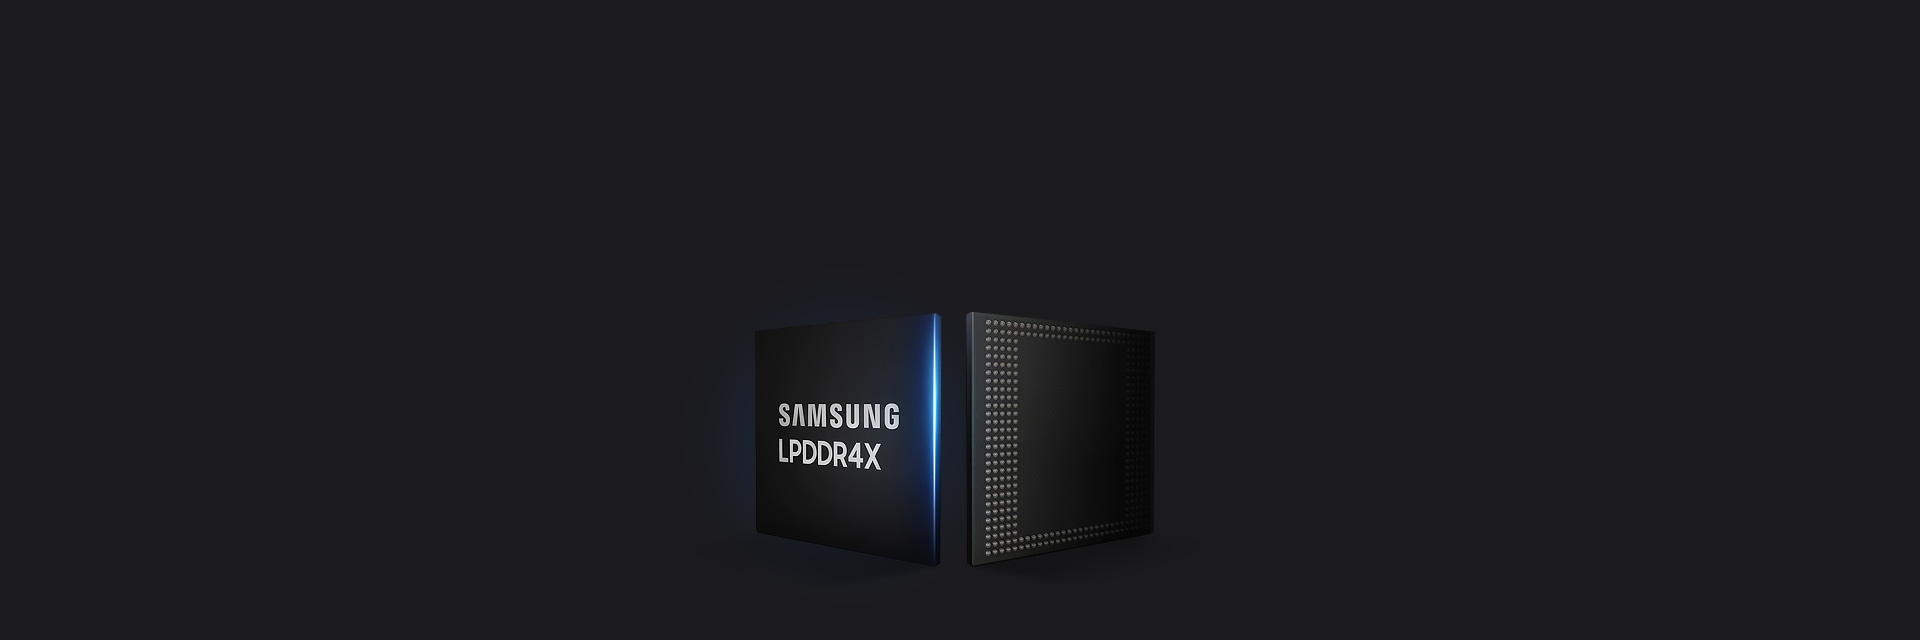 Samsung Semiconductor DRAM LPDDR4X, Make your mobile device shine